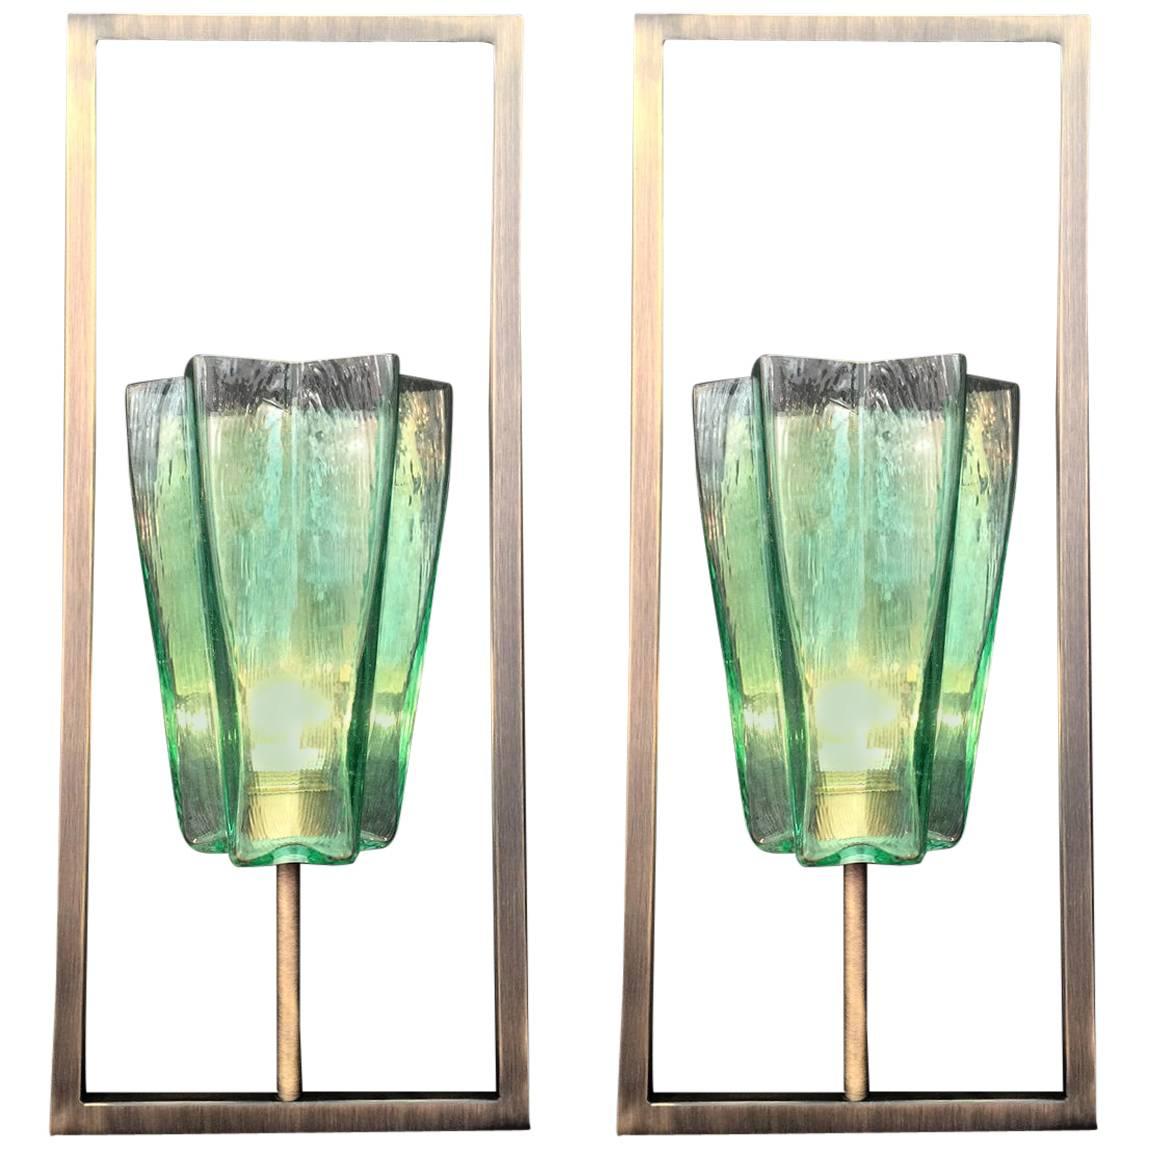 Four Pairs of Architectural Emerald Green Sconces by Fabio Ltd